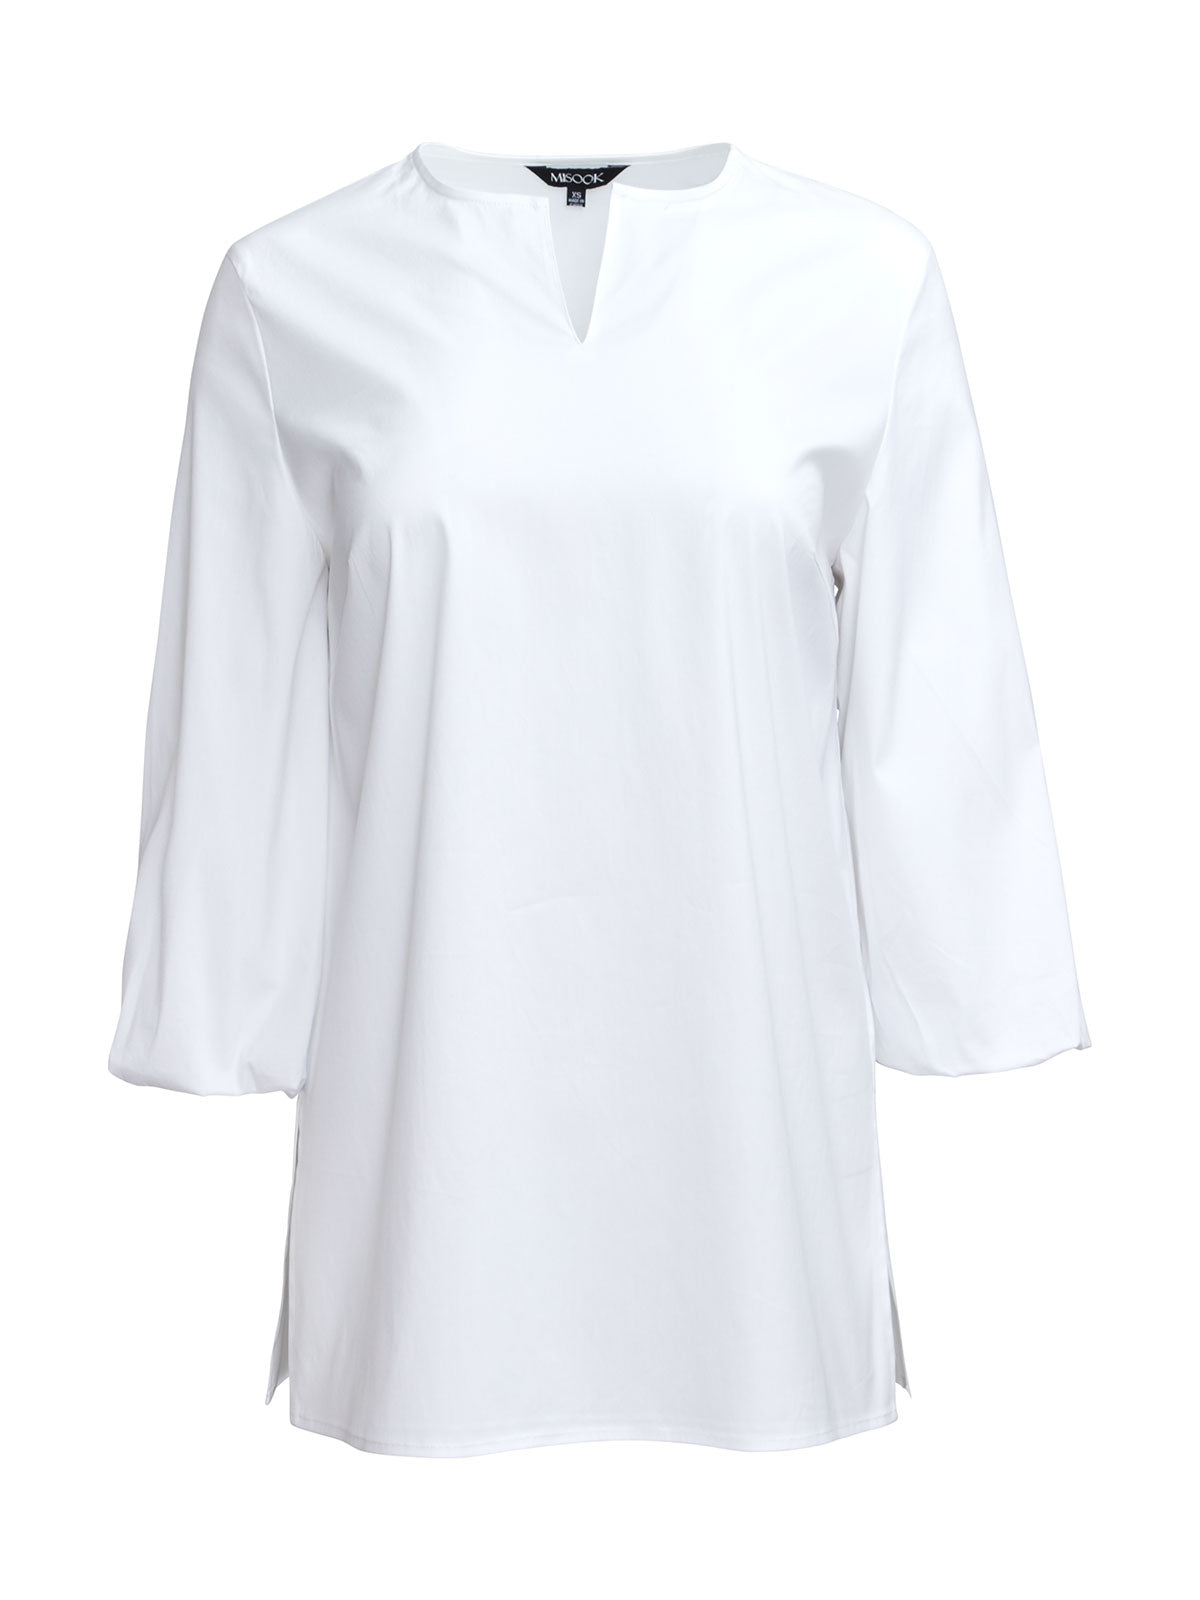 White Pleated Bishop Sleeve Louis Vuitton Blouse Top Shirt. 